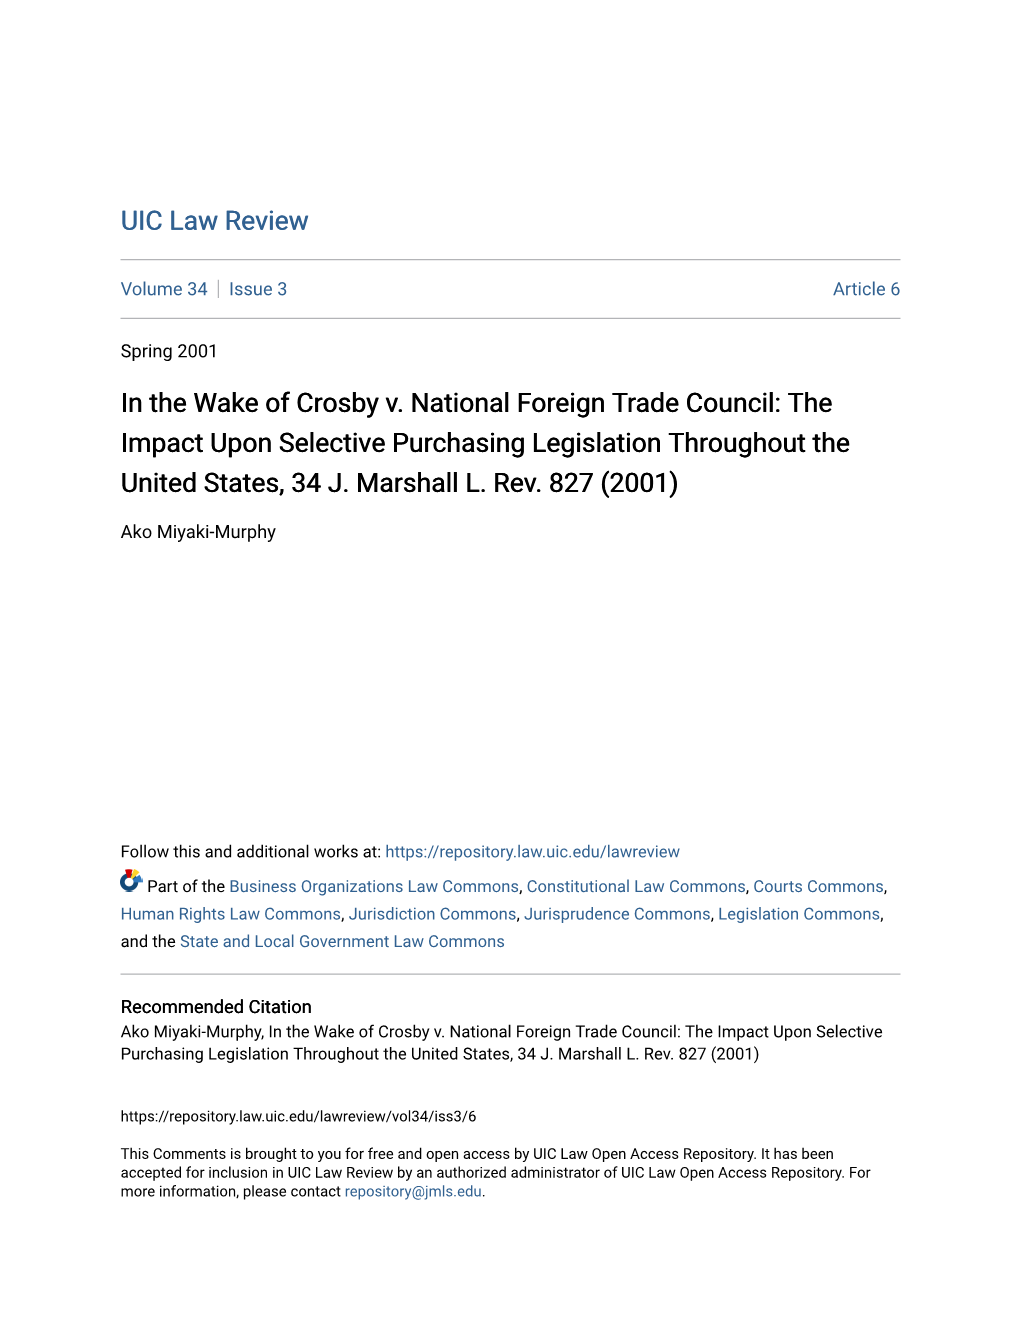 In the Wake of Crosby V. National Foreign Trade Council: the Impact Upon Selective Purchasing Legislation Throughout the United States, 34 J